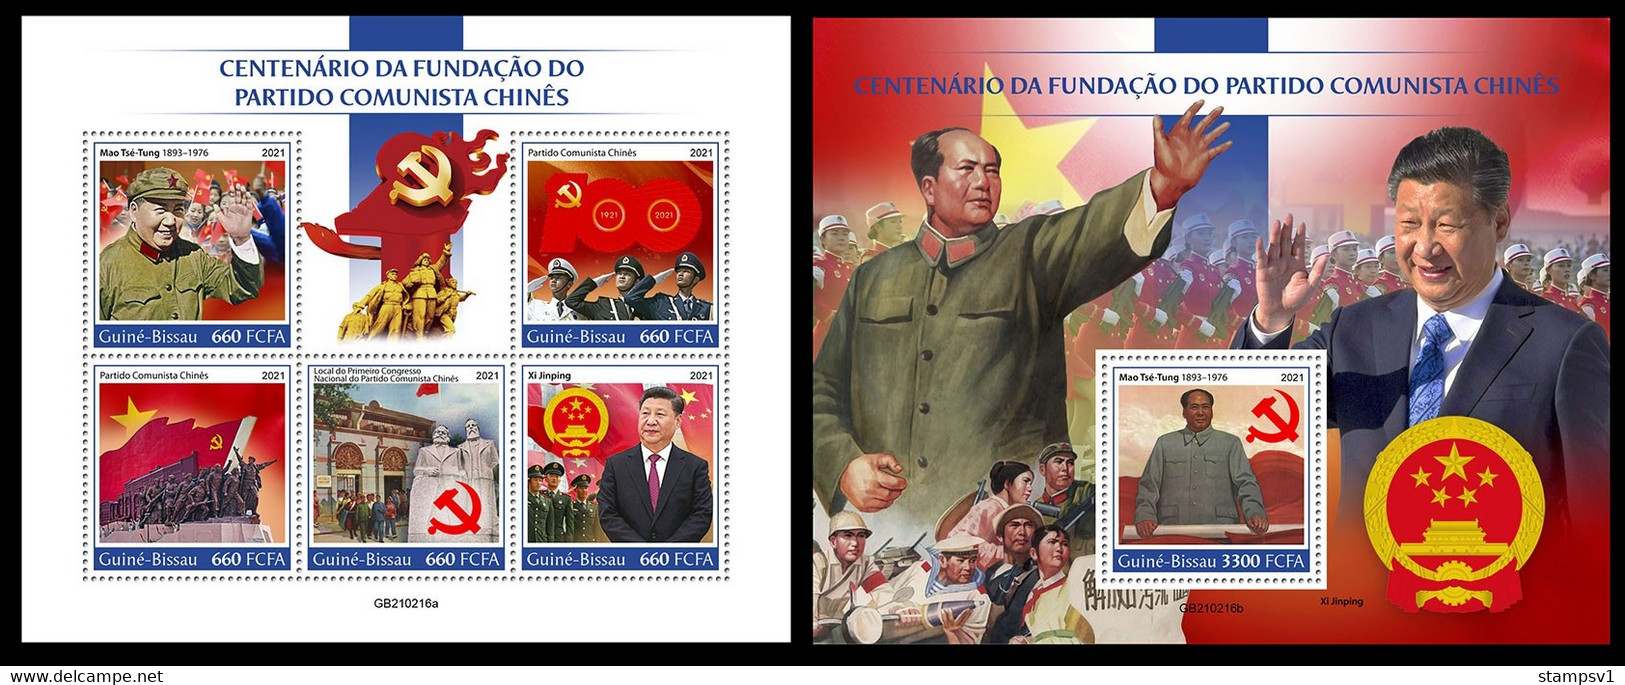 Guinea Bissau 2021 Communist Party Of China. (216) OFFICIAL ISSUE - Mao Tse-Tung